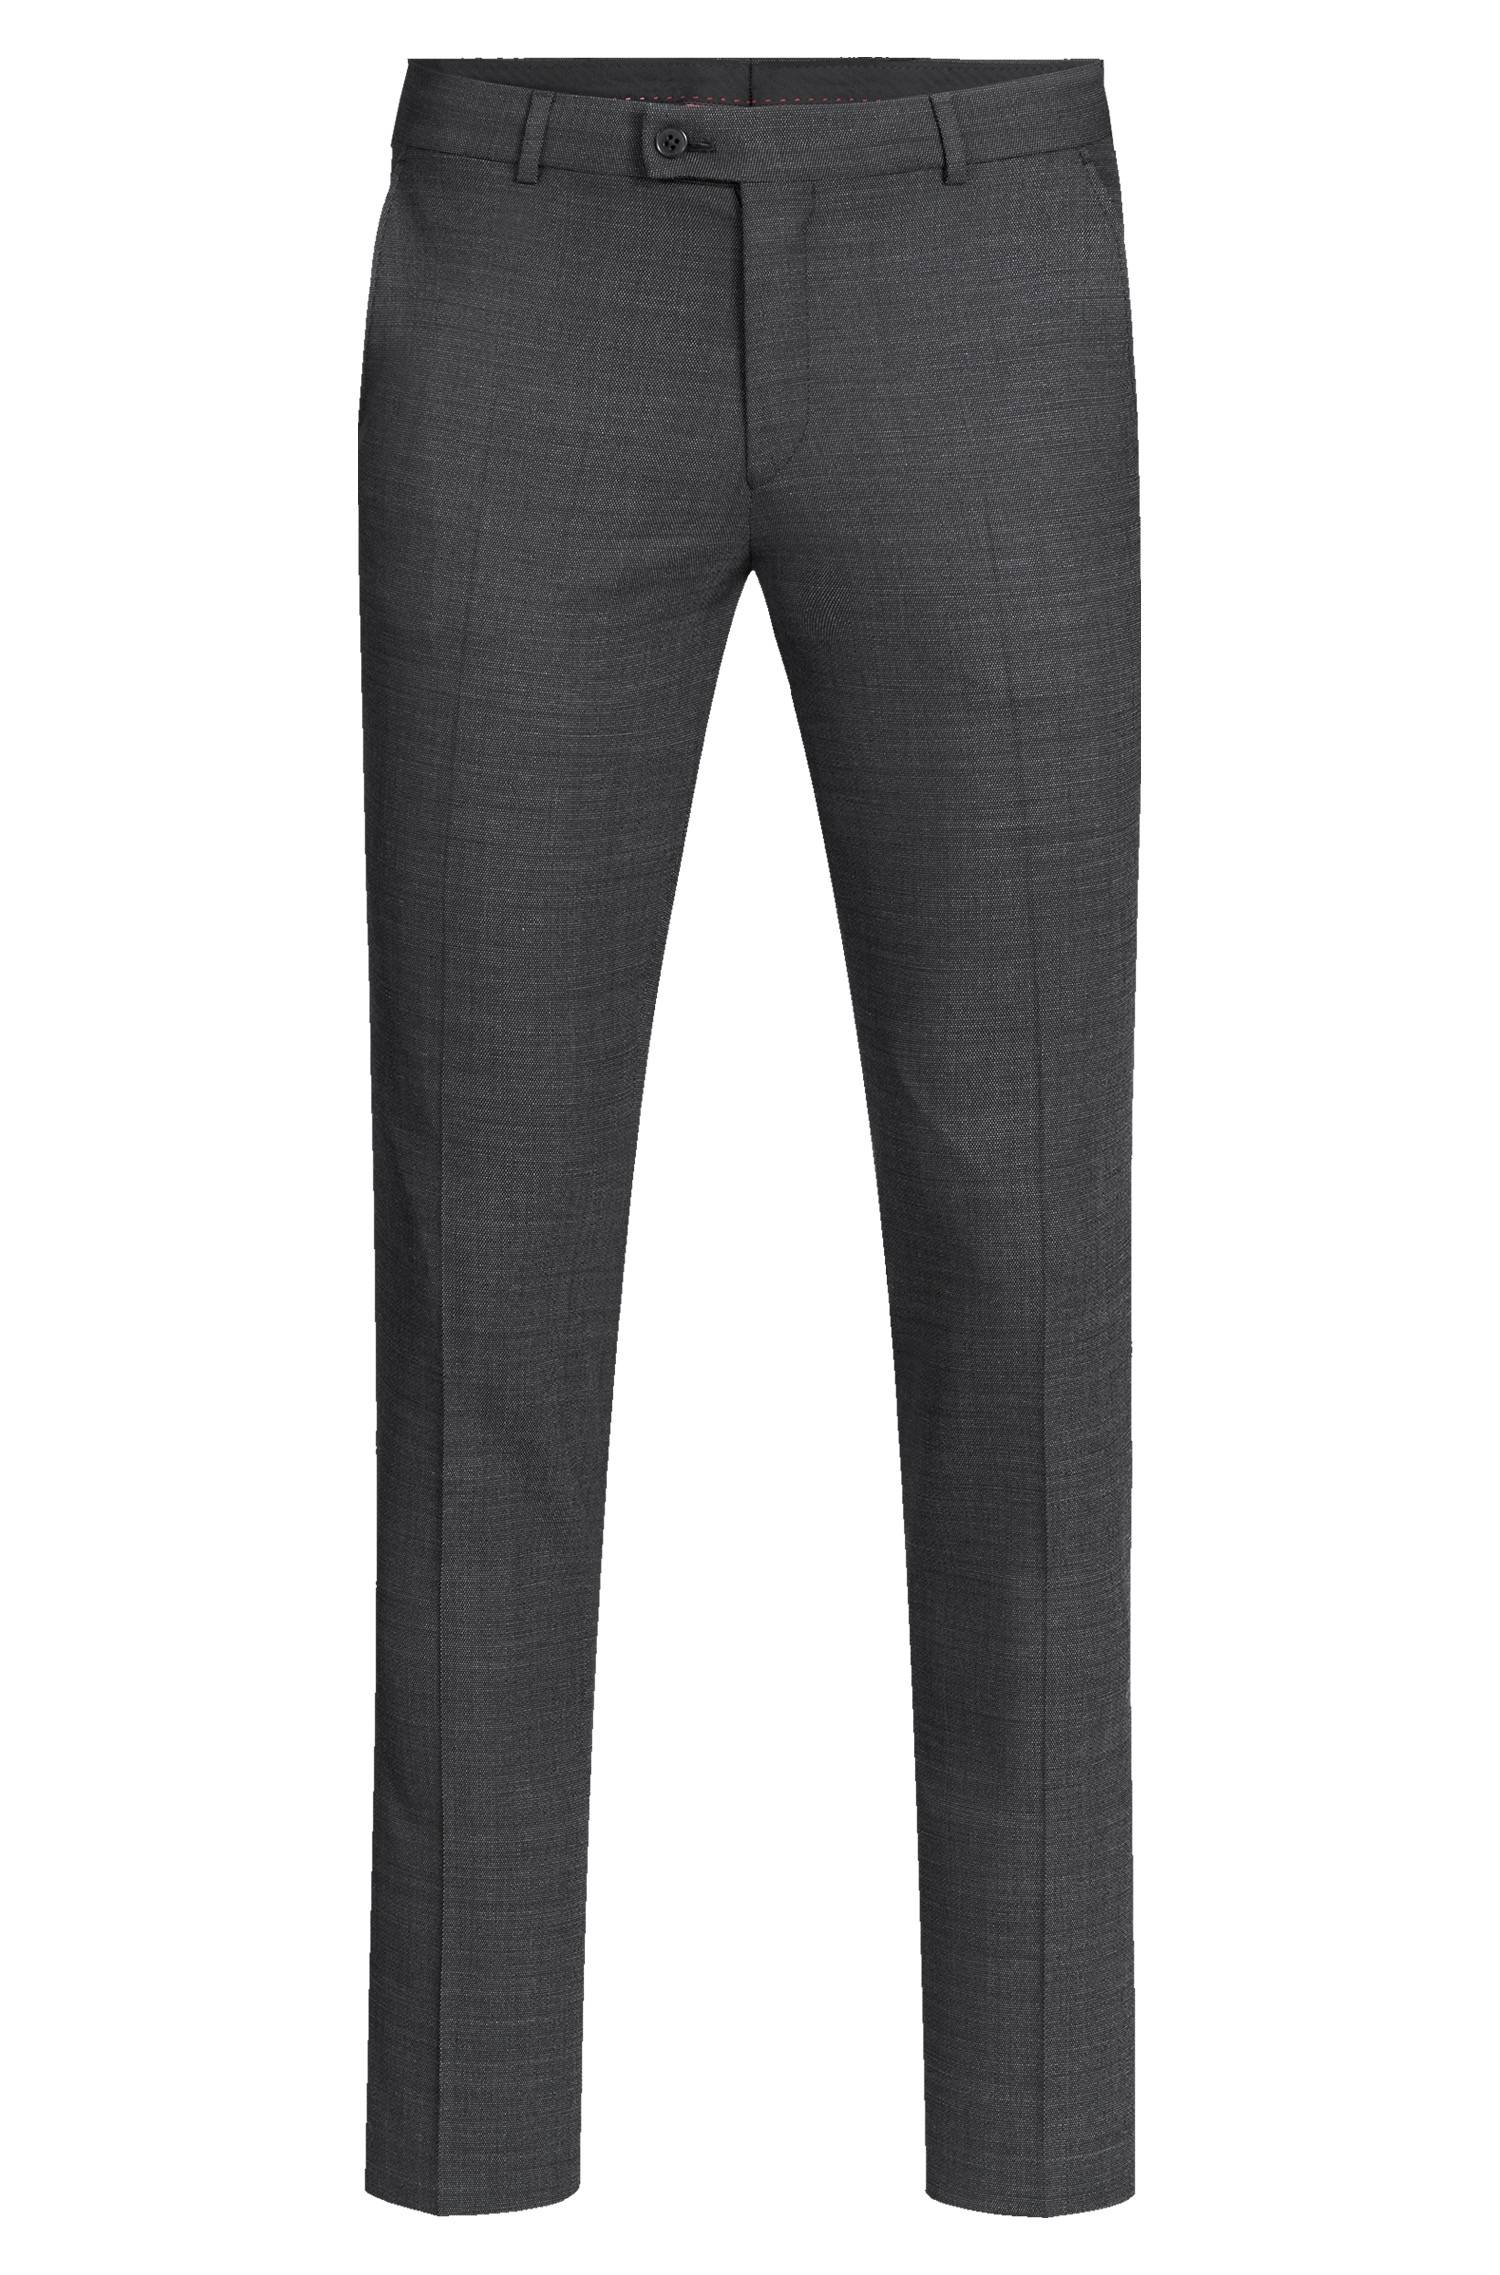 Men's trousers pinpoint MODERN 37.5 slim fit